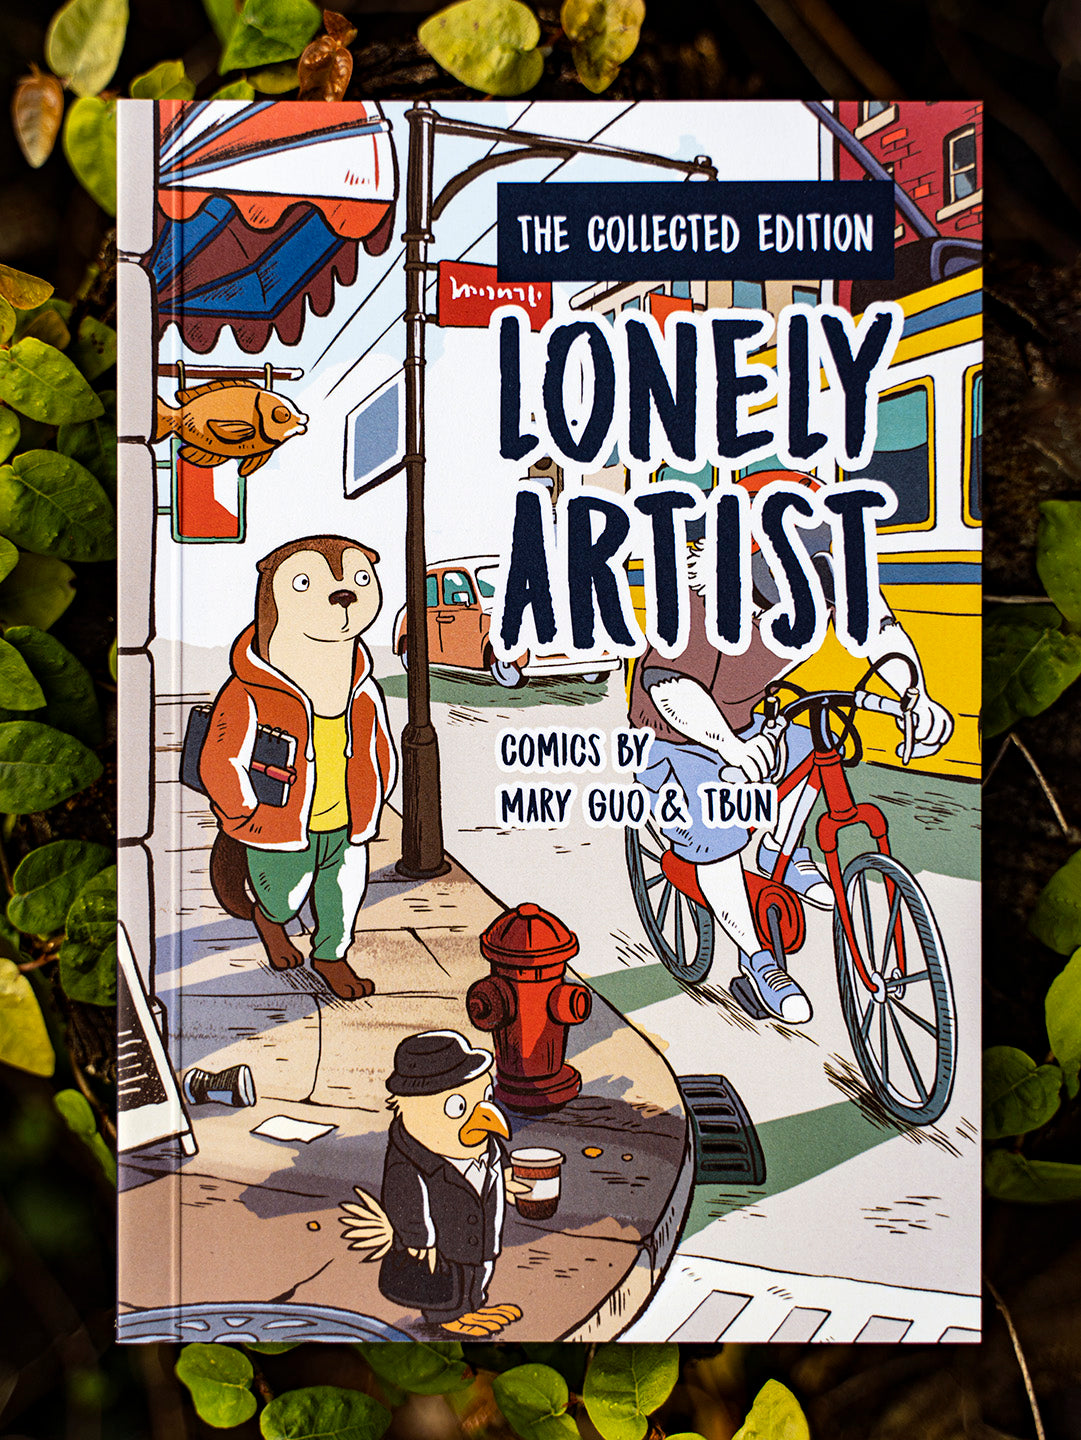 Lonely Artist: The Collected Edition